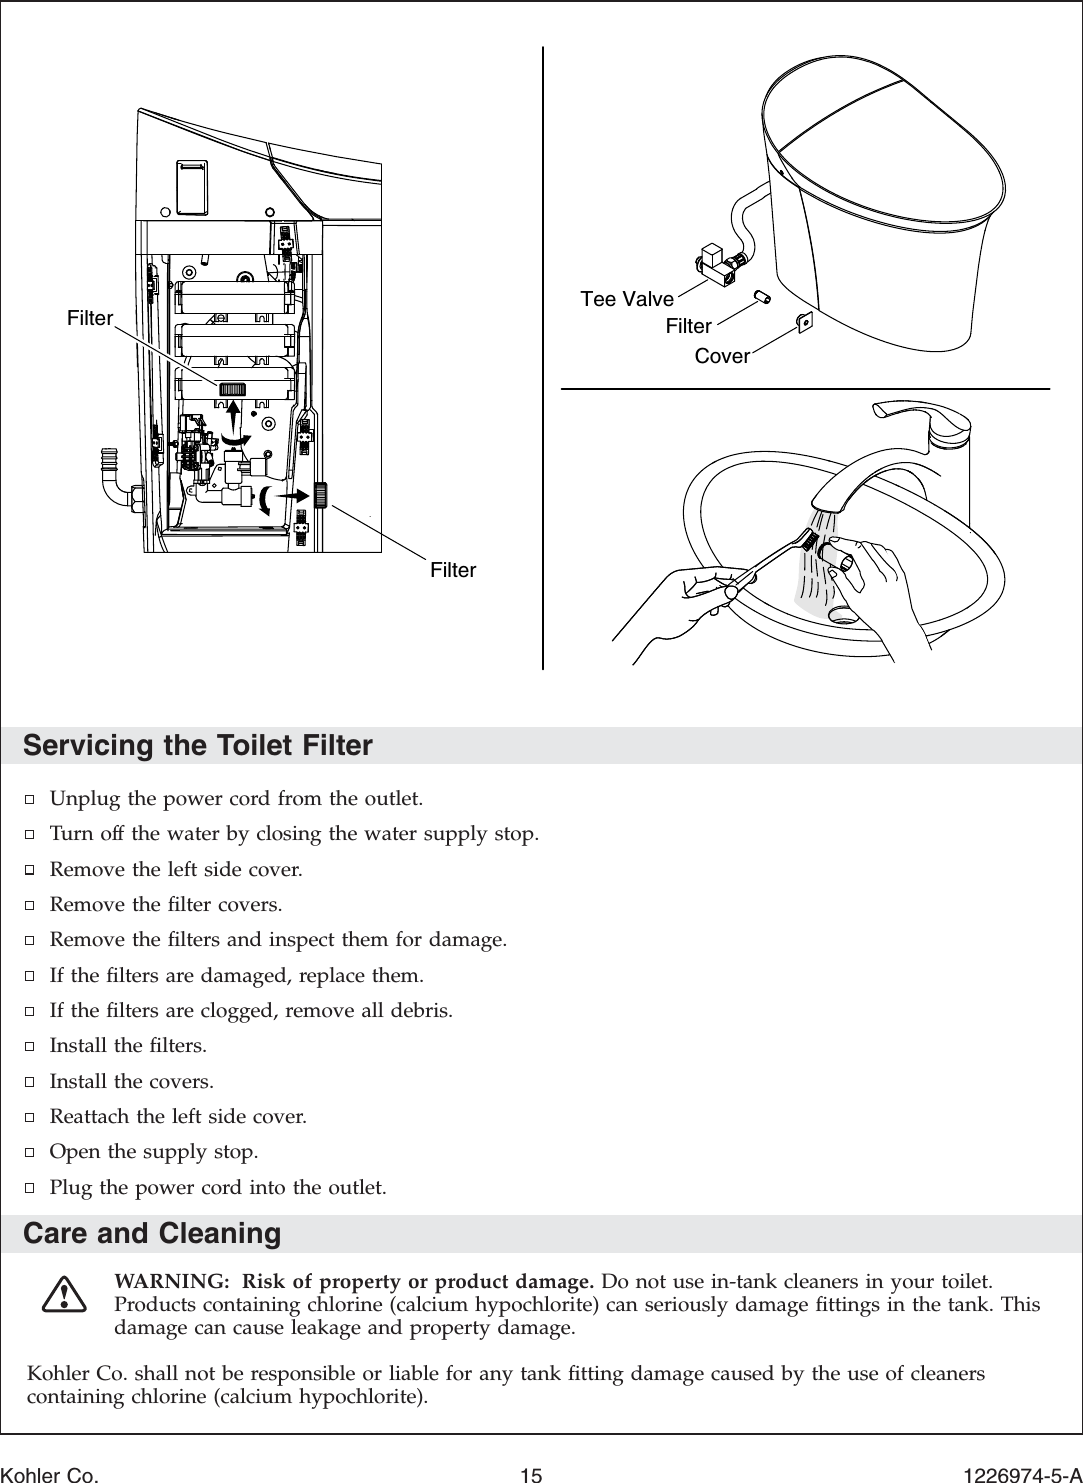 Servicing the Toilet FilterUnplug the power cord from the outlet.Turn off the water by closing the water supply stop.Remove the left side cover.Remove the ﬁlter covers.Remove the ﬁlters and inspect them for damage.If the ﬁlters are damaged, replace them.If the ﬁlters are clogged, remove all debris.Install the ﬁlters.Install the covers.Reattach the left side cover.Open the supply stop.Plug the power cord into the outlet.Care and CleaningWARNING: Risk of property or product damage. Do not use in-tank cleaners in your toilet.Products containing chlorine (calcium hypochlorite) can seriously damage ﬁttings in the tank. Thisdamage can cause leakage and property damage.Kohler Co. shall not be responsible or liable for any tank ﬁtting damage caused by the use of cleanerscontaining chlorine (calcium hypochlorite).Filter FilterCoverFilterTee ValveKohler Co. 15 1226974-5-A